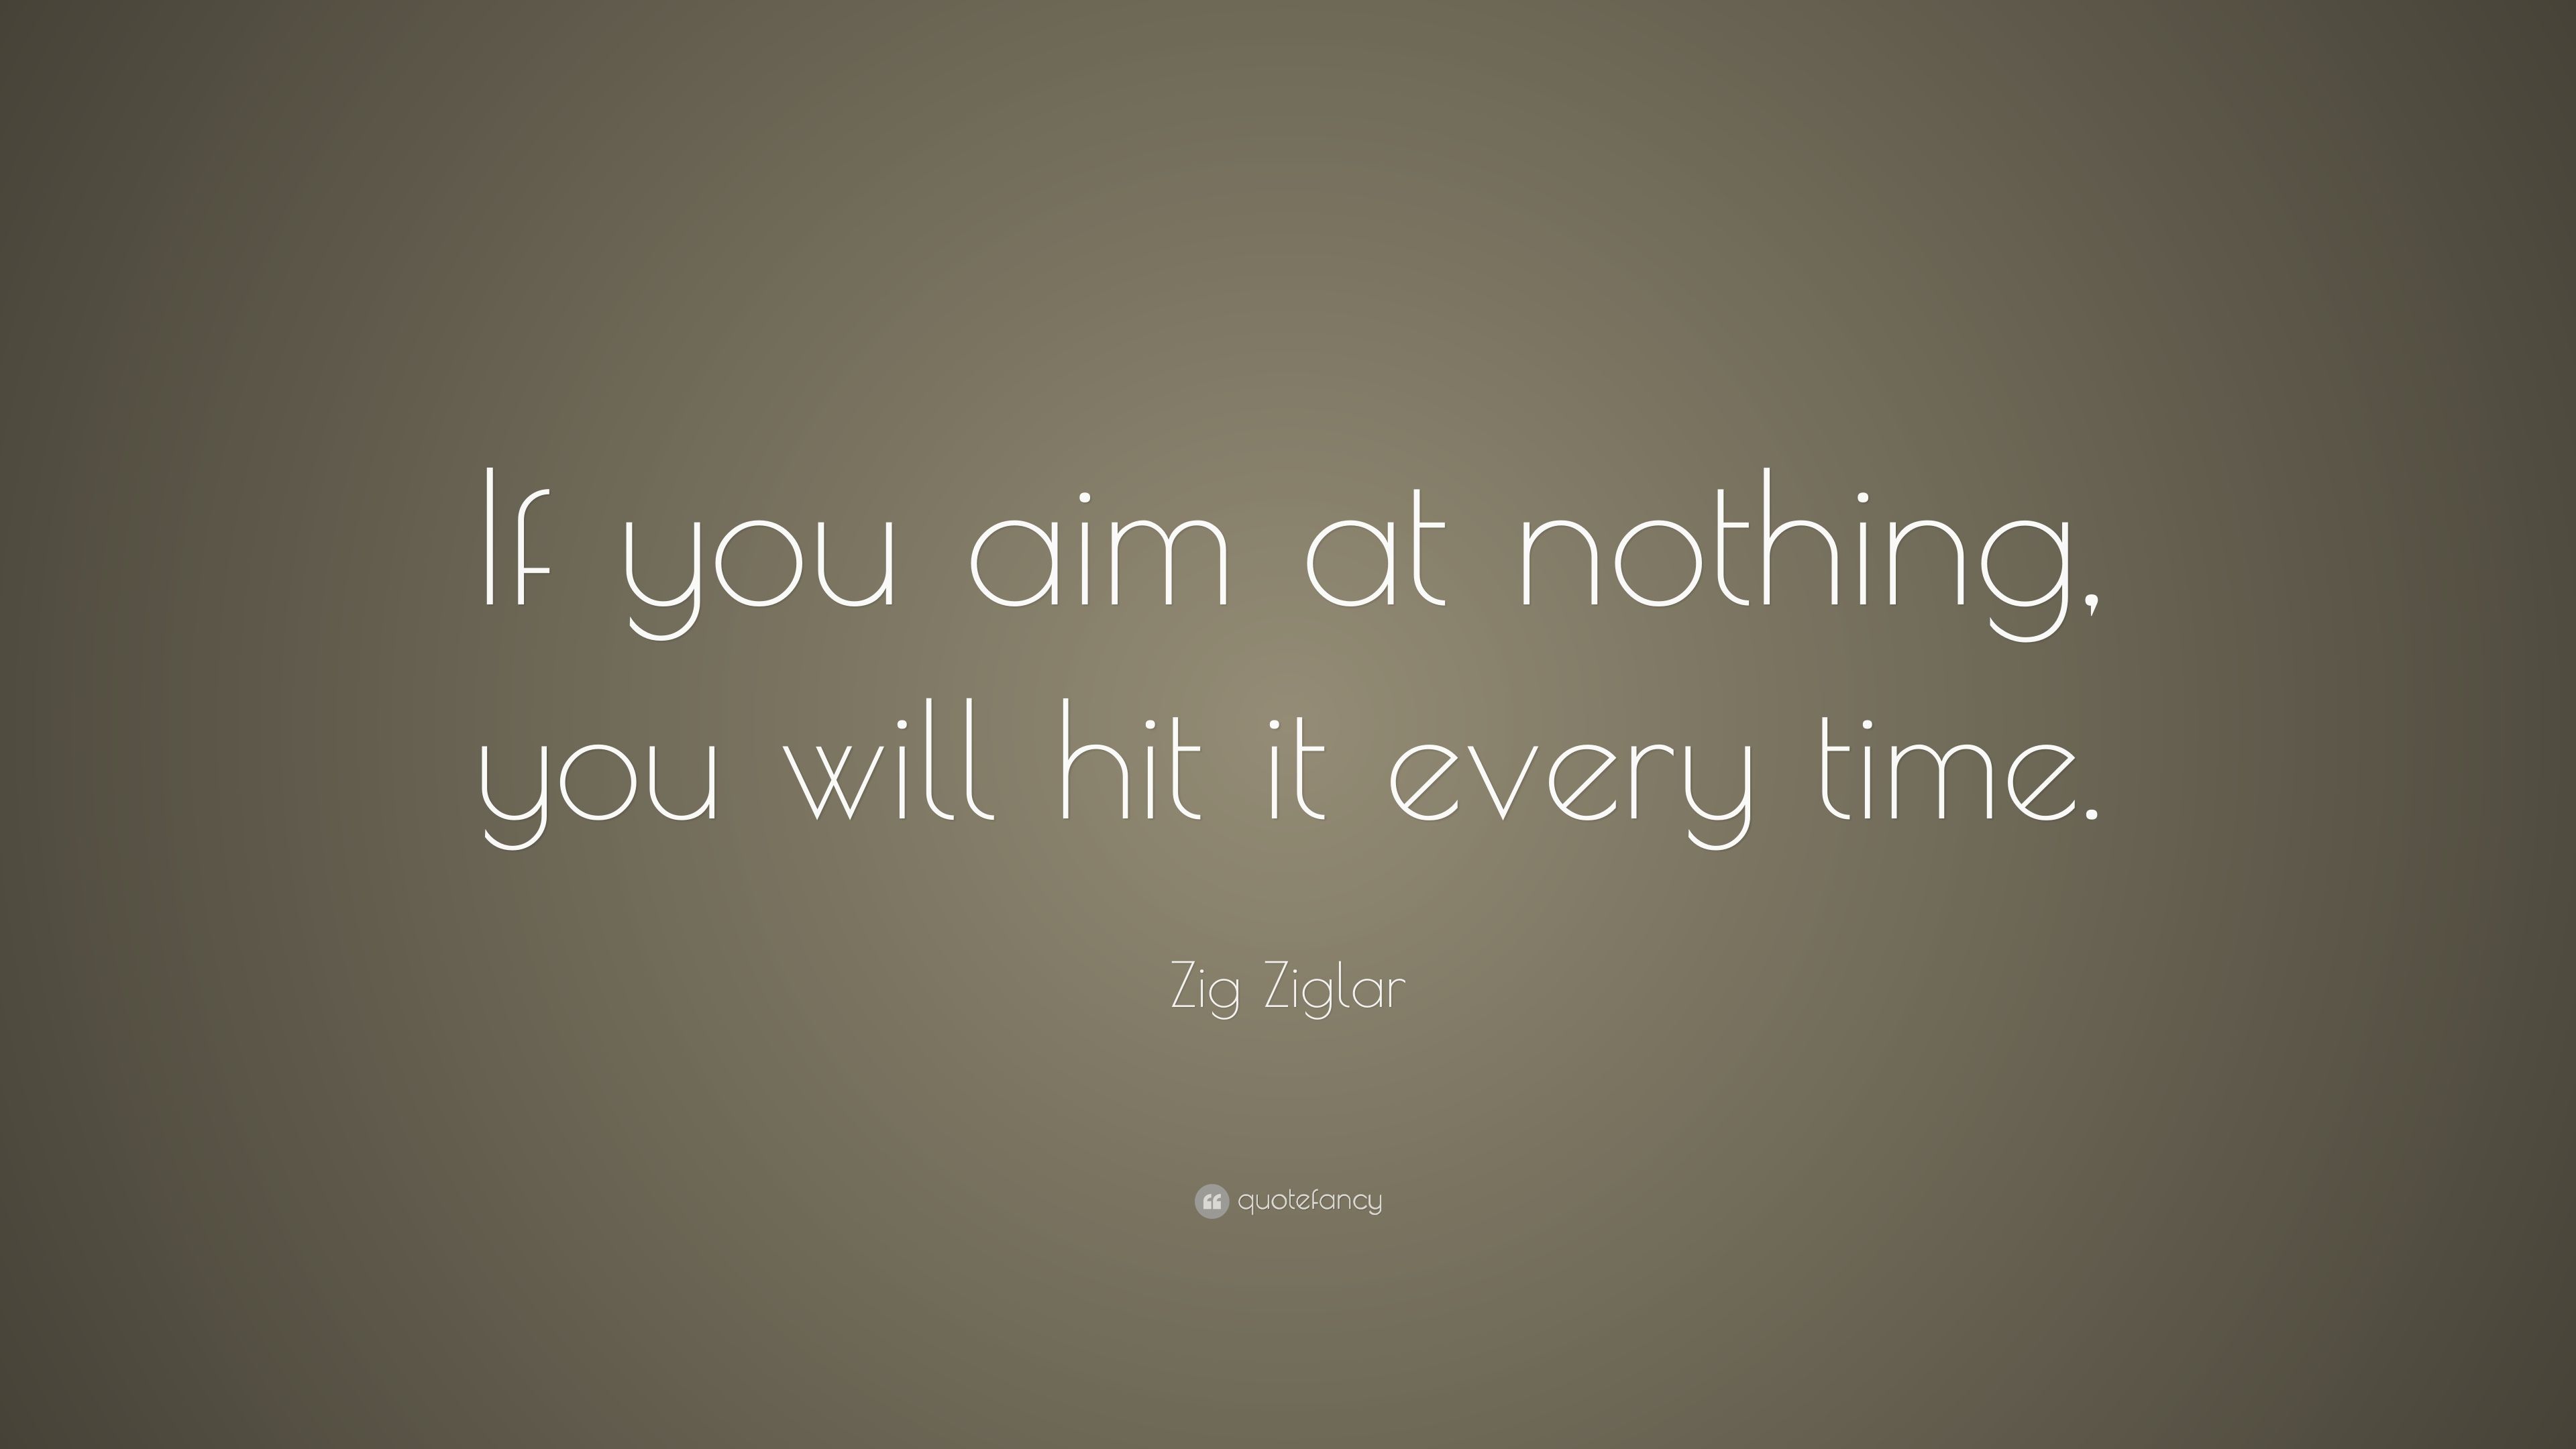 Zig Ziglar Quote: “If you aim at nothing, you will hit it every ...